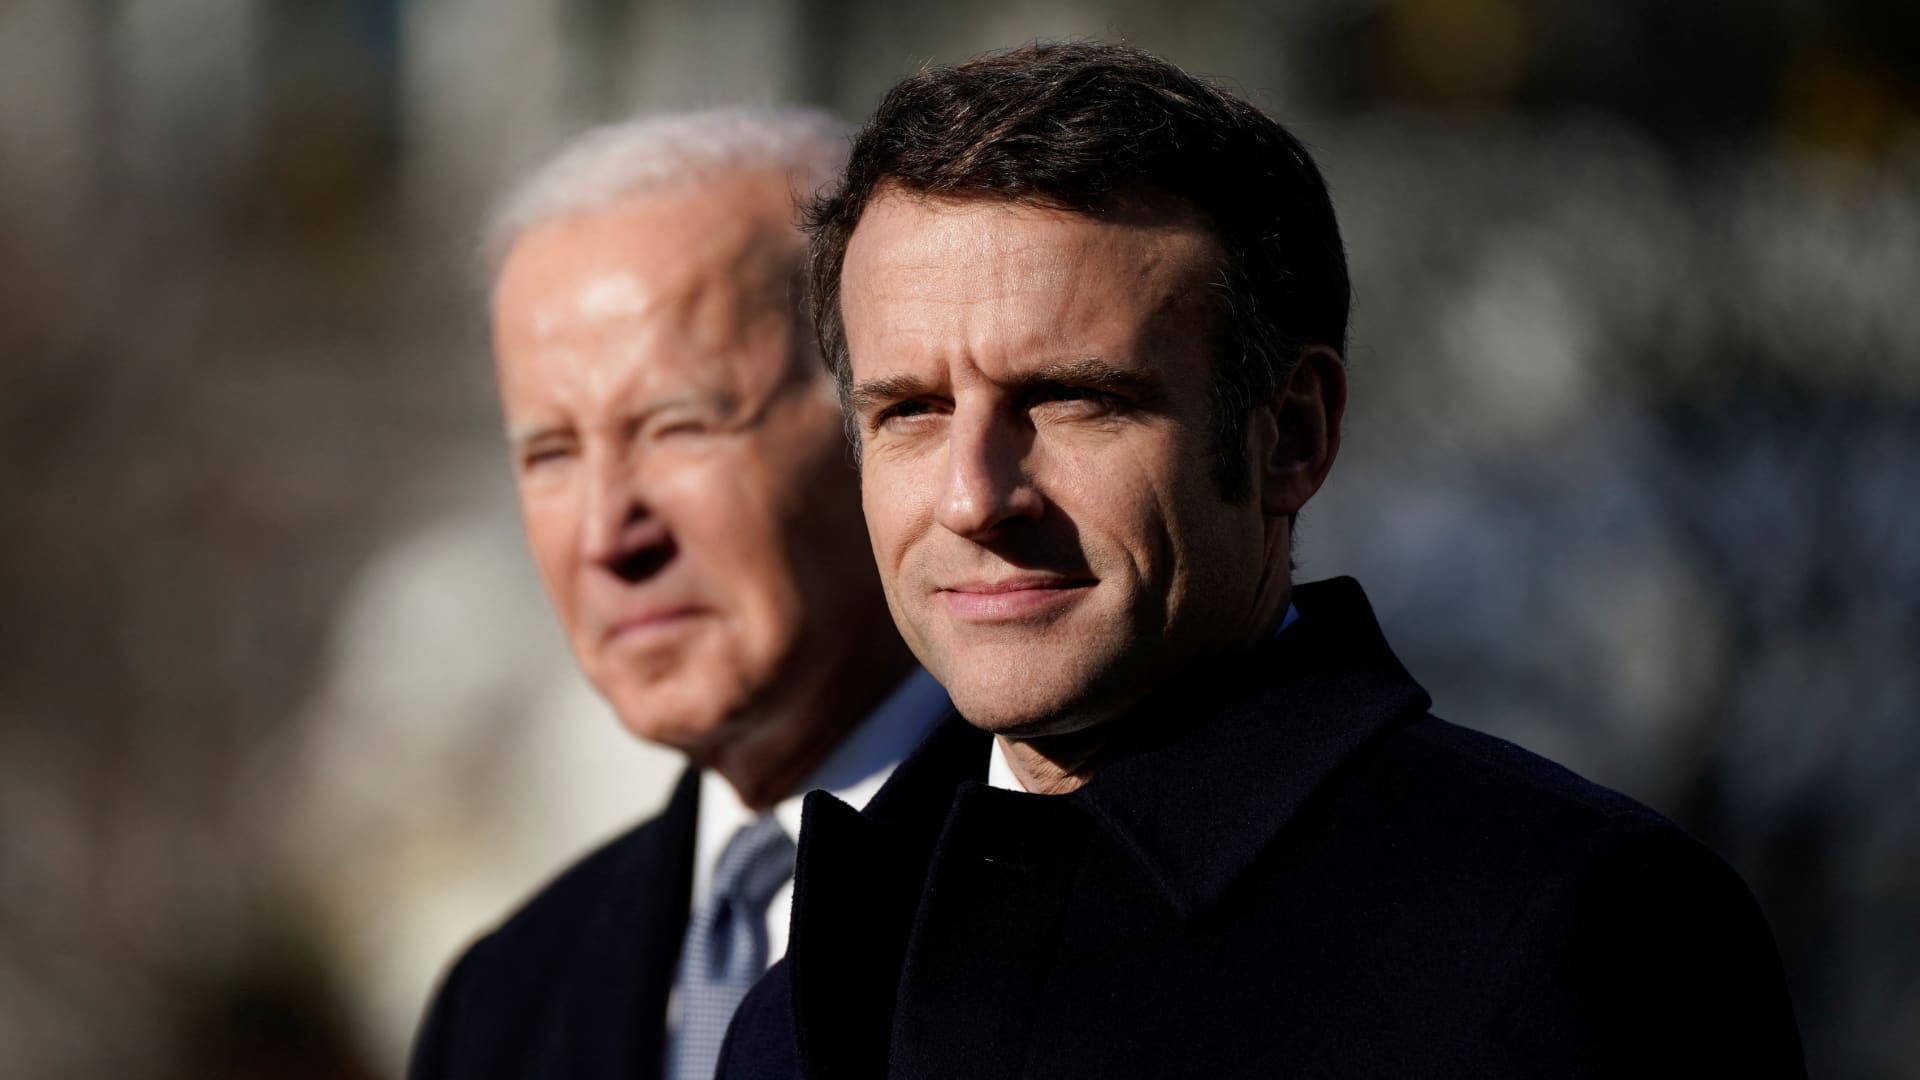 French President Emmanuel Macron and U.S. President Joe Biden stand together onstage during an official State Arrival Ceremony for President Macron on the South Lawn of the White House in Washington, U.S., December 1, 2022. 